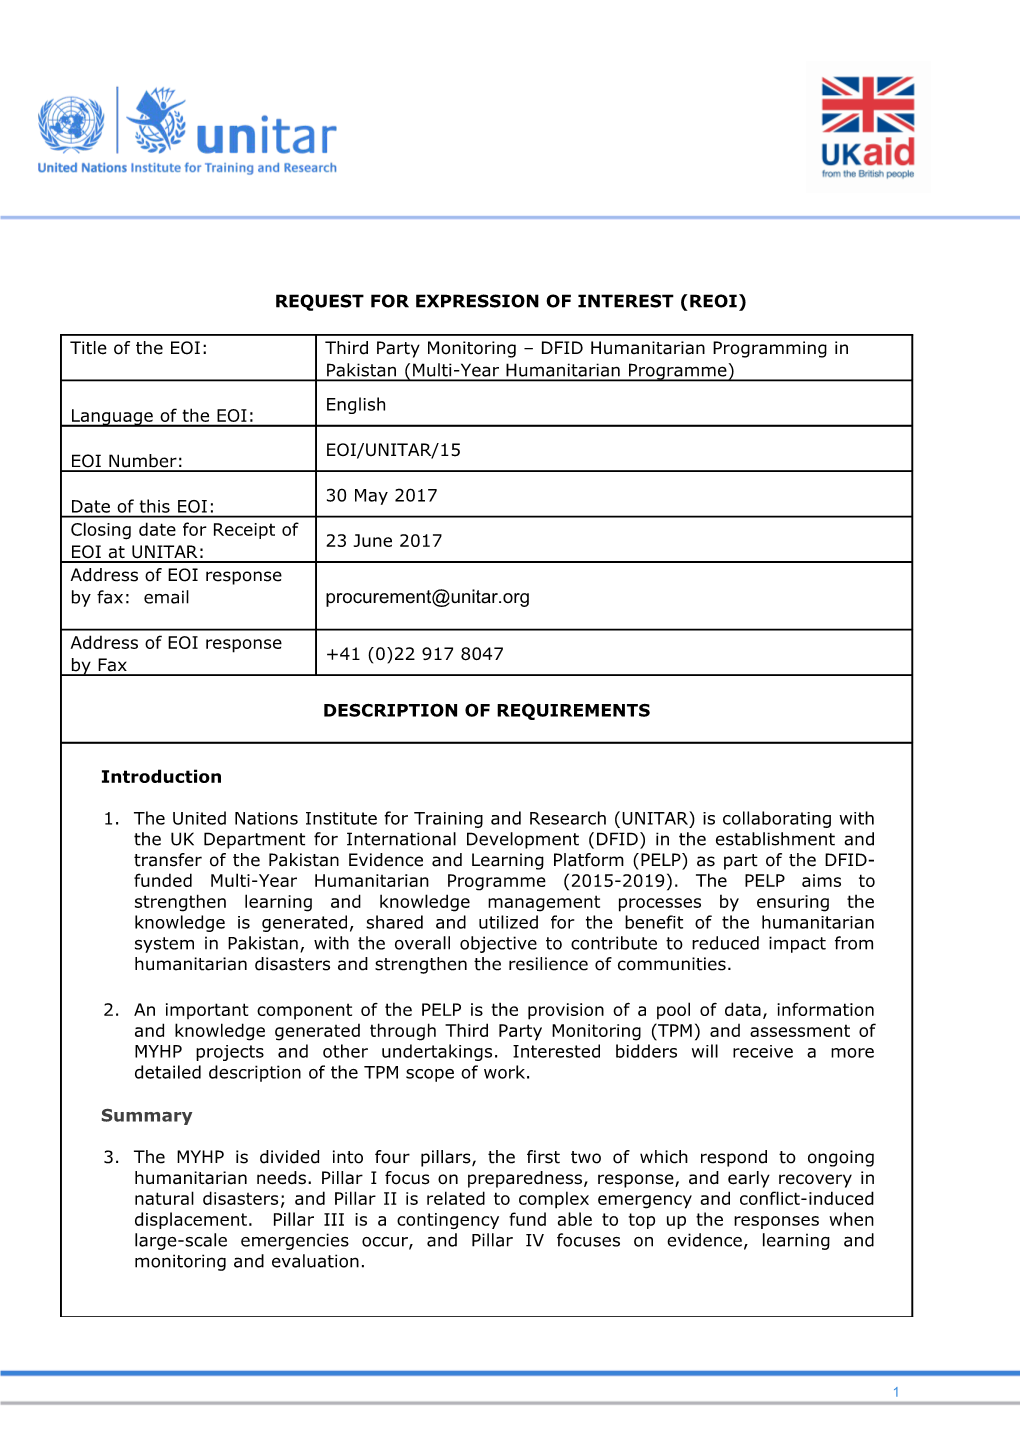 Request for Expression of Interest (Reoi)